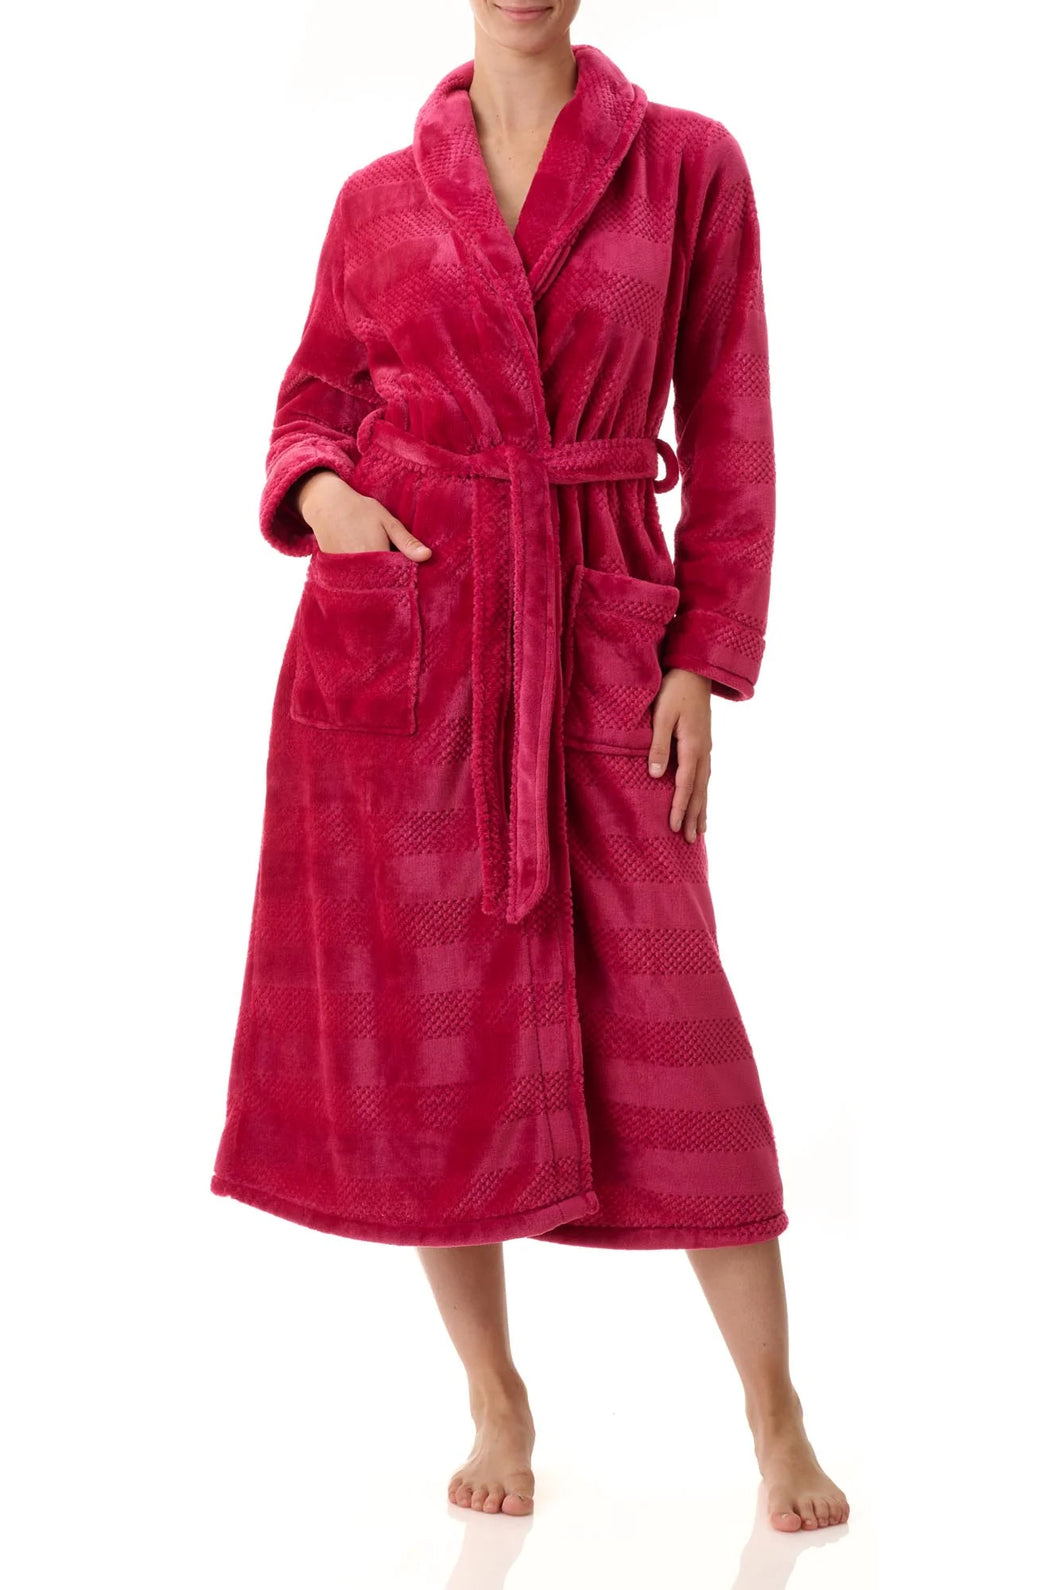 Givoni 3GU18 Cranberry Mid Wrap Gown